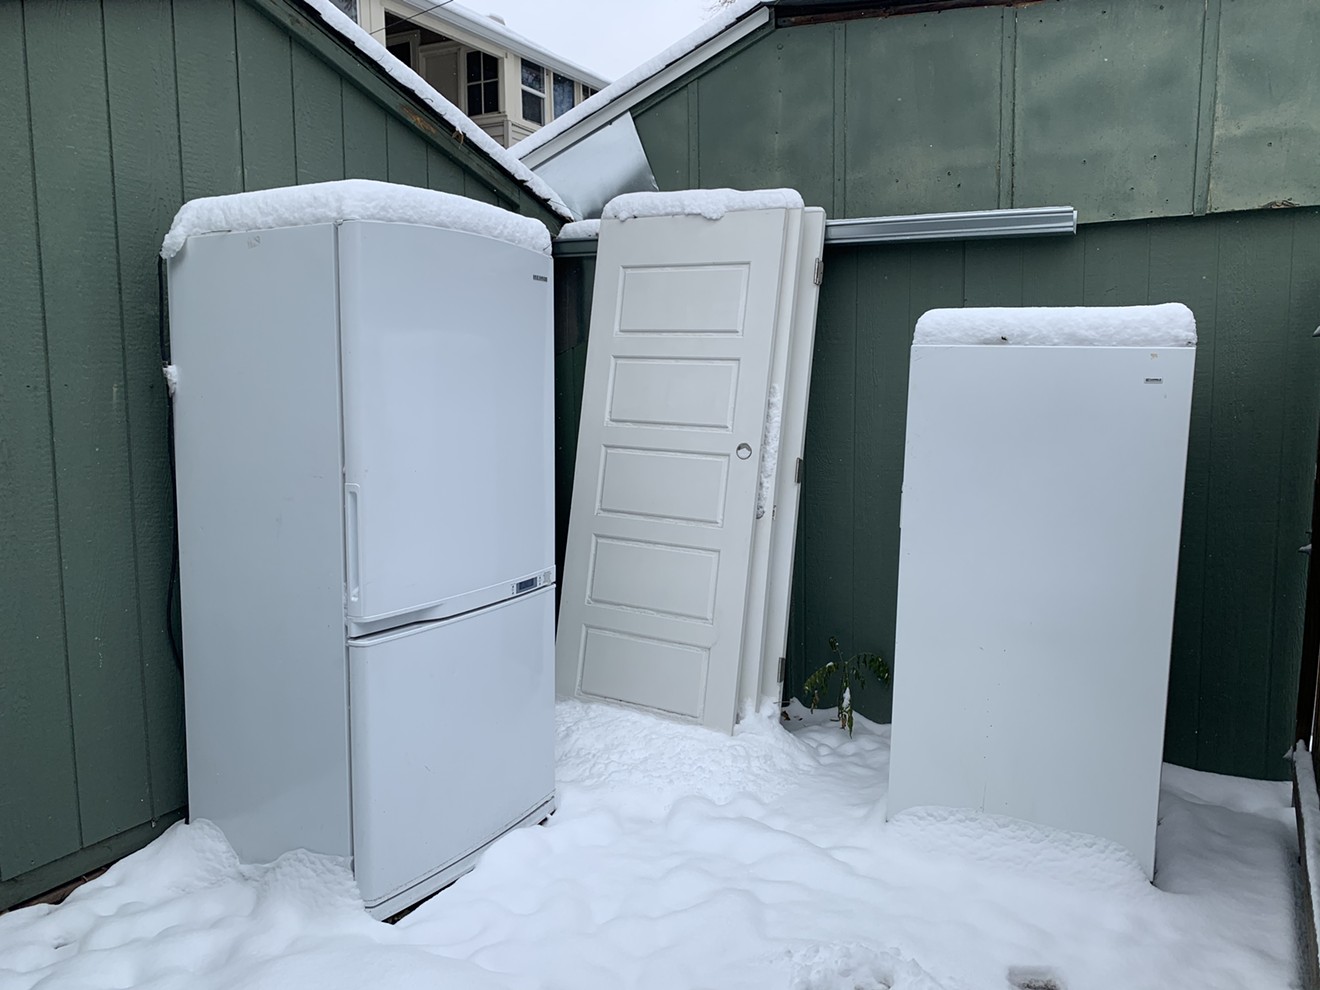 After being painted, these fridges will supply the community with a place to exchange fresh food.